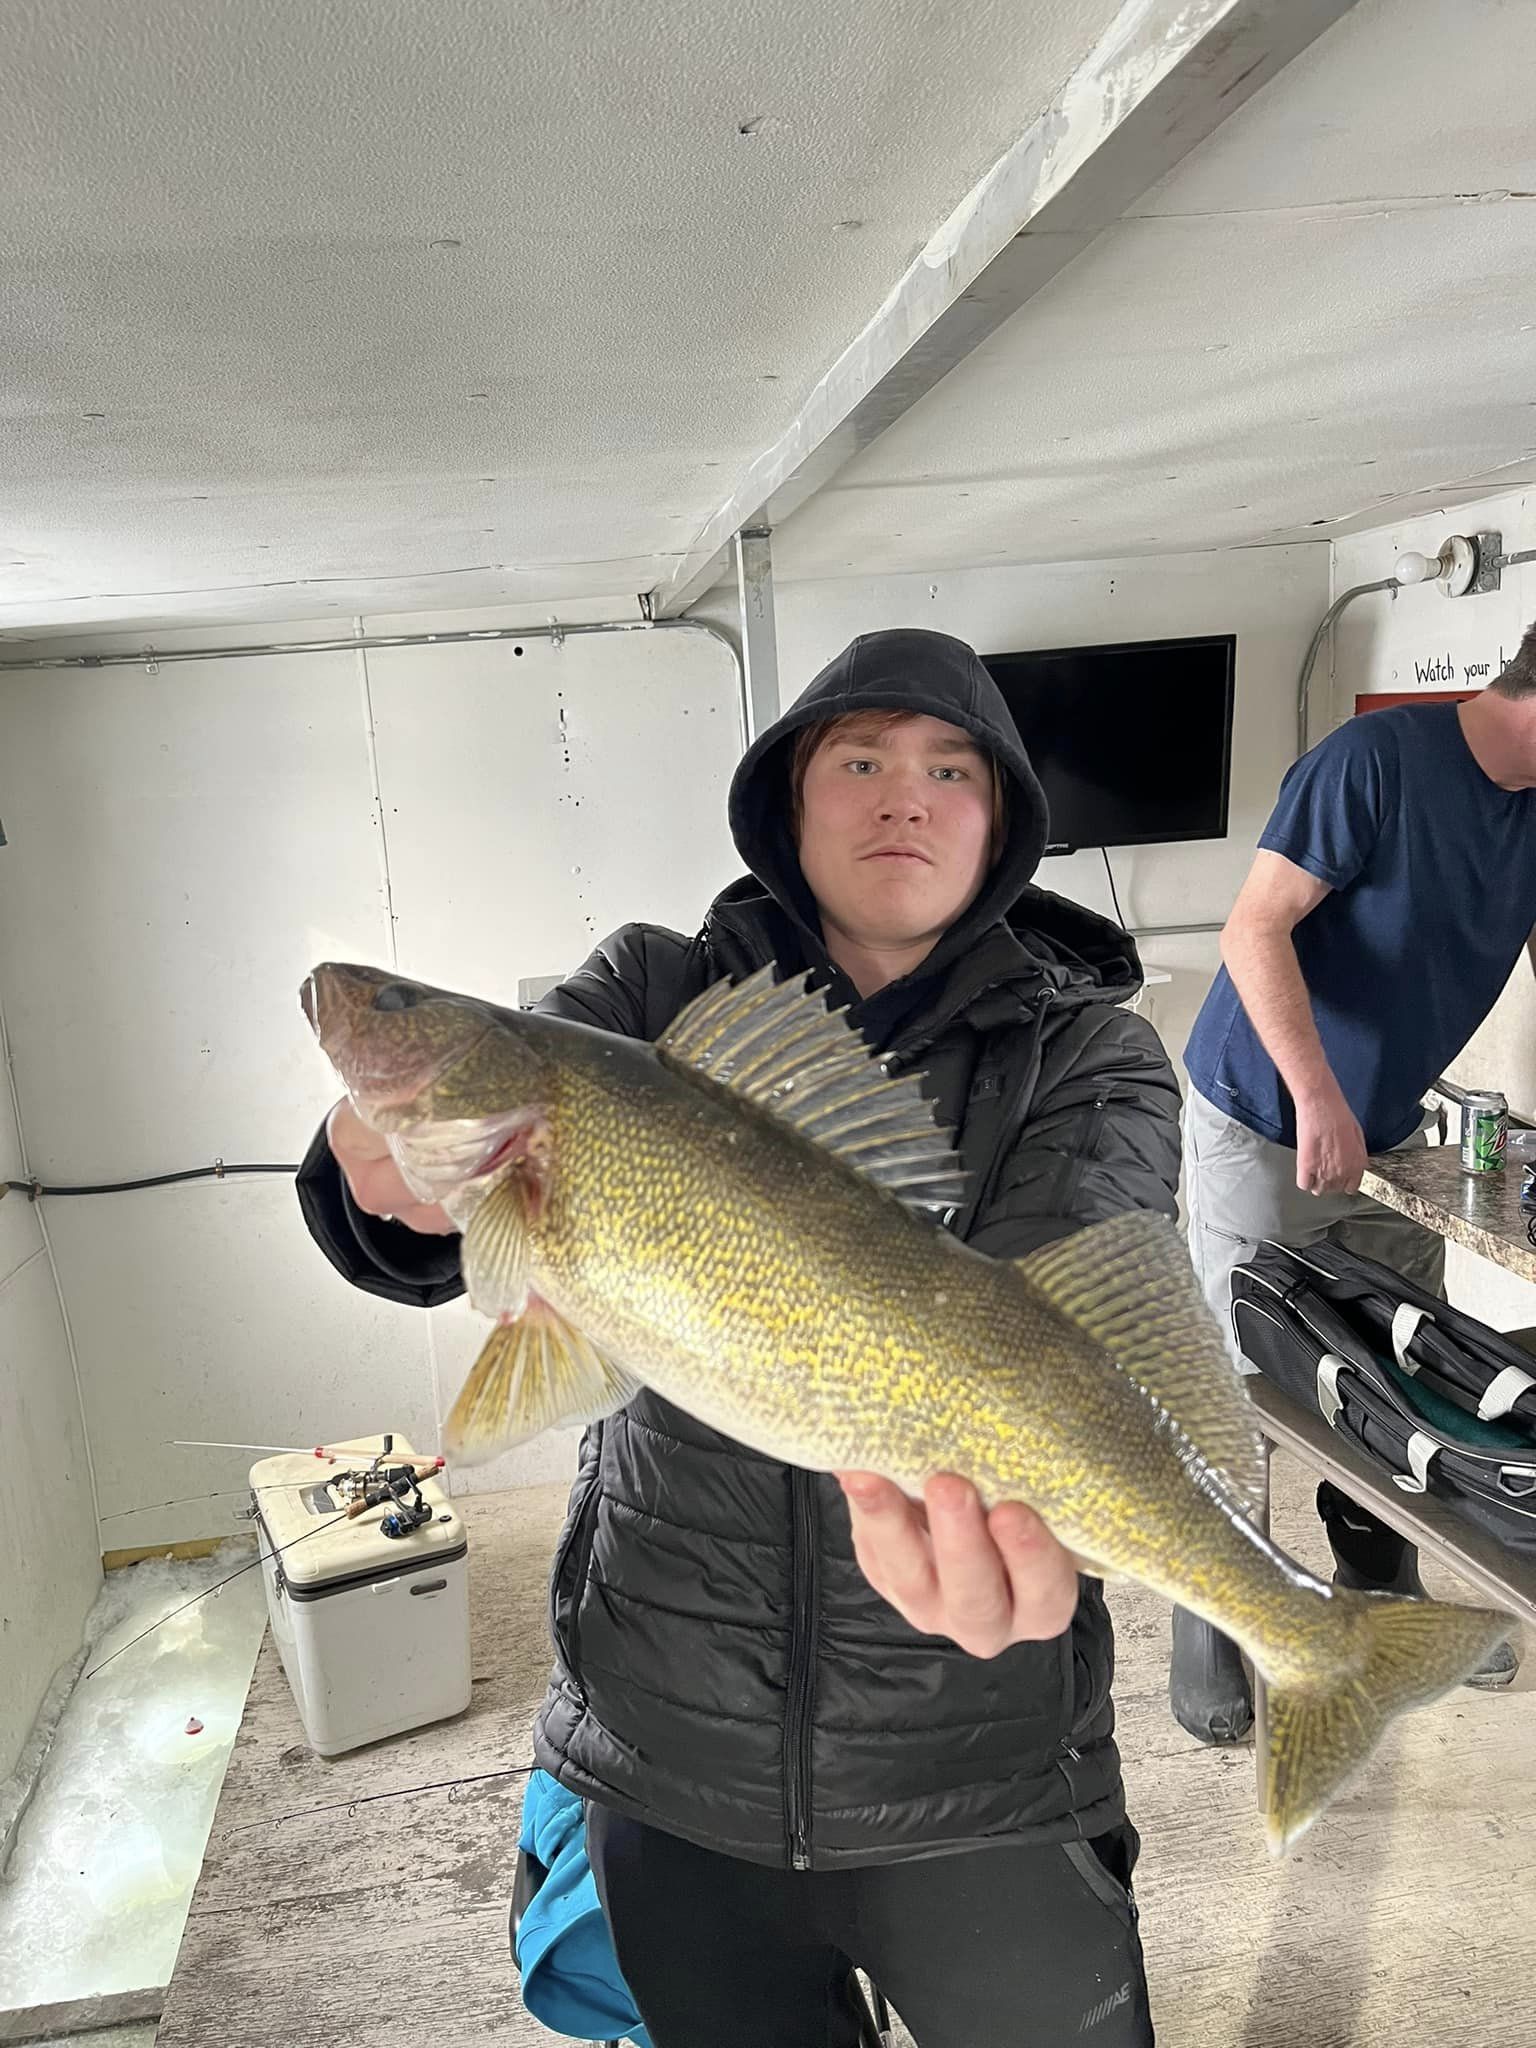 Ice Fishing Walleyes! Deadstick or Jigging? First Fish Of The